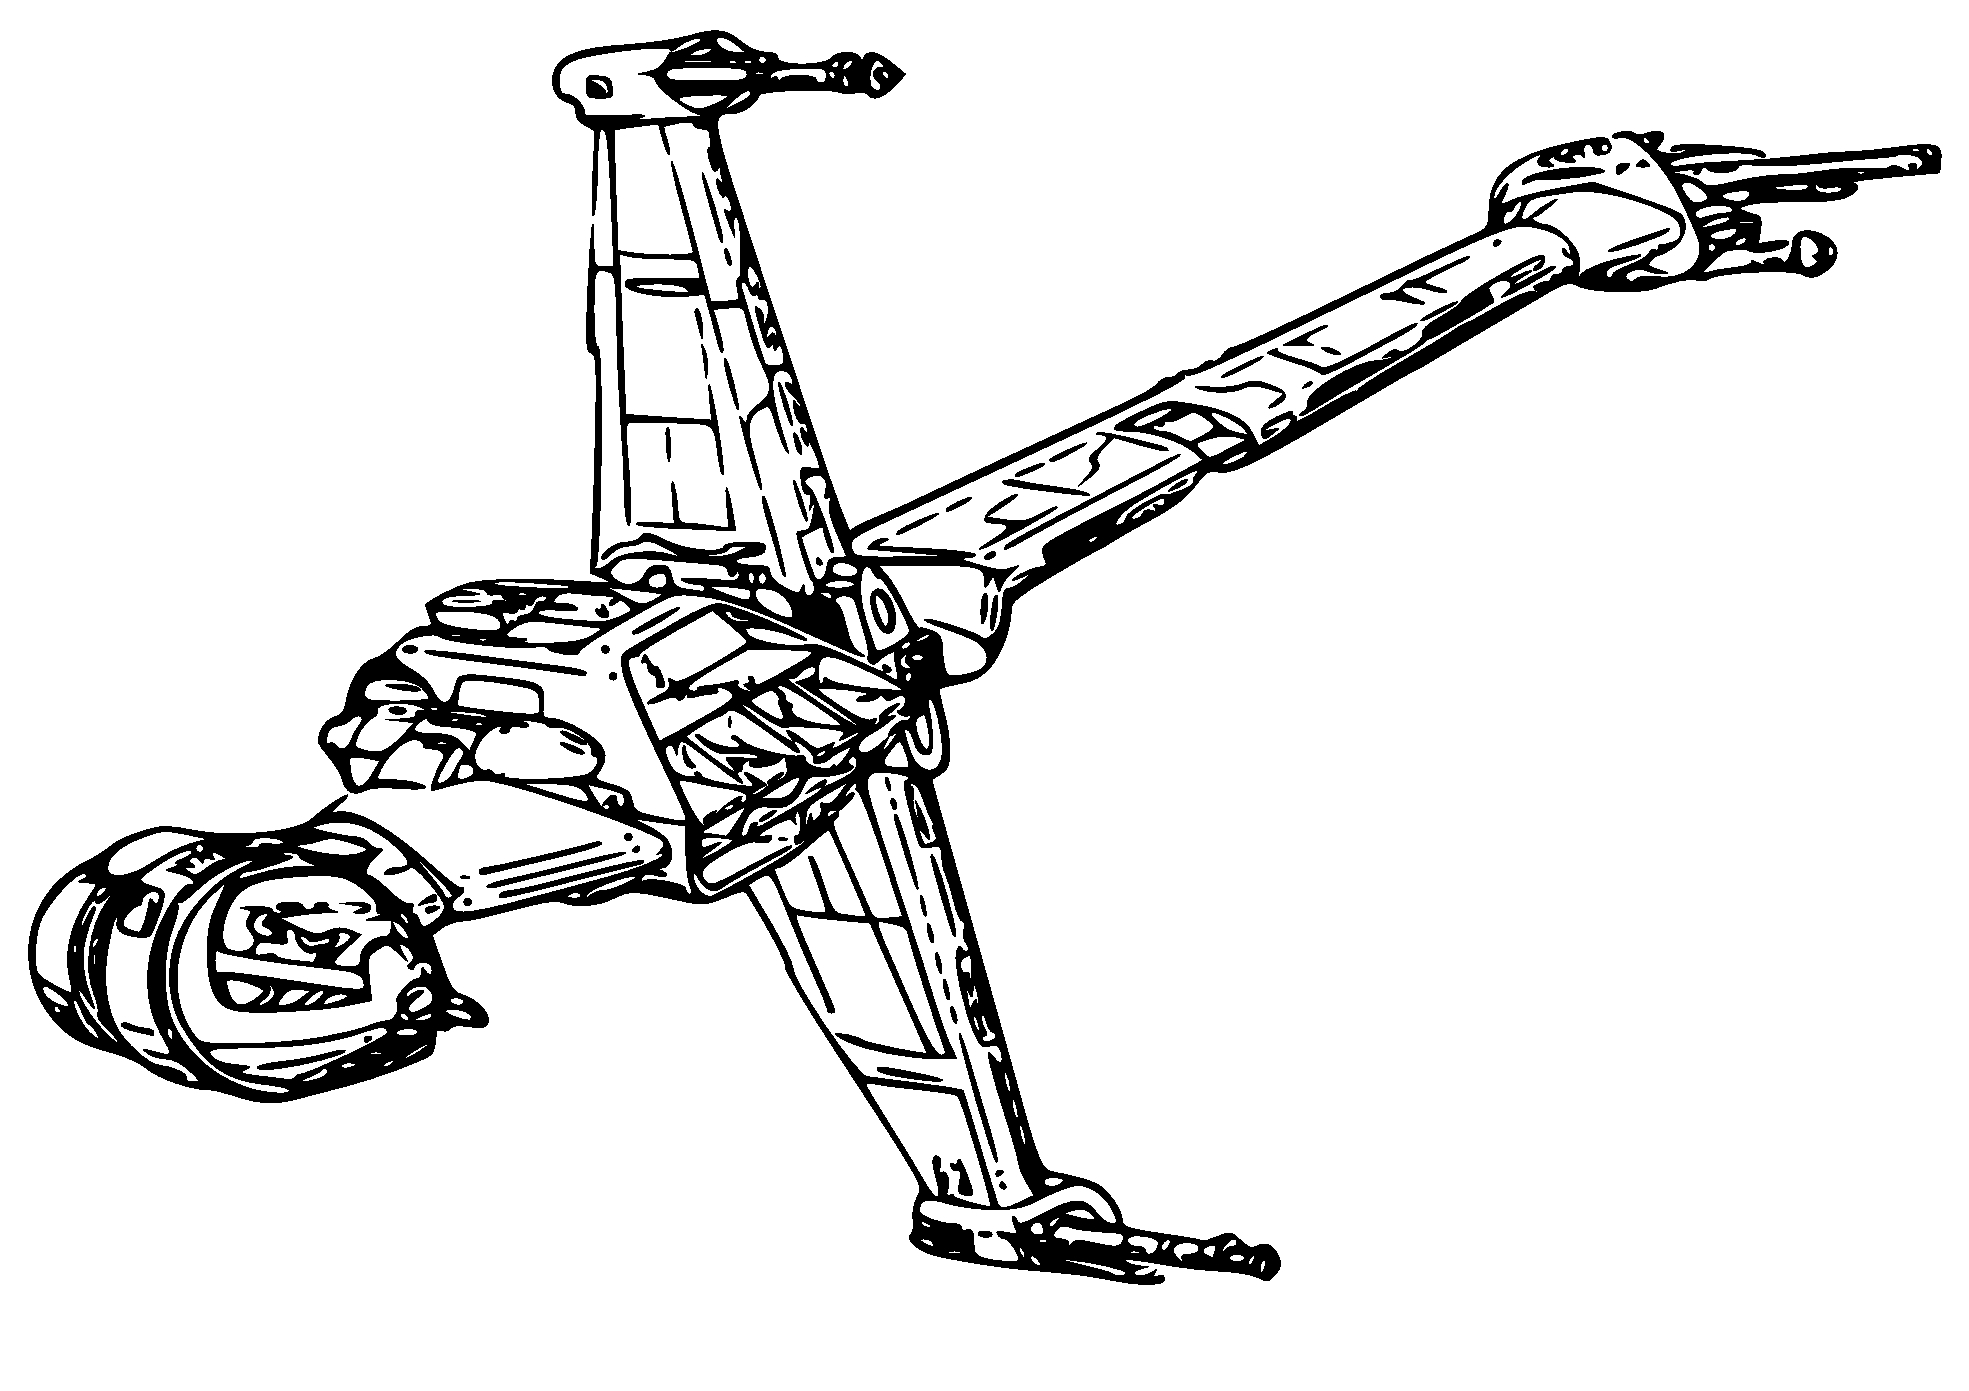 lego star wars ships coloring pages at getdrawings  free